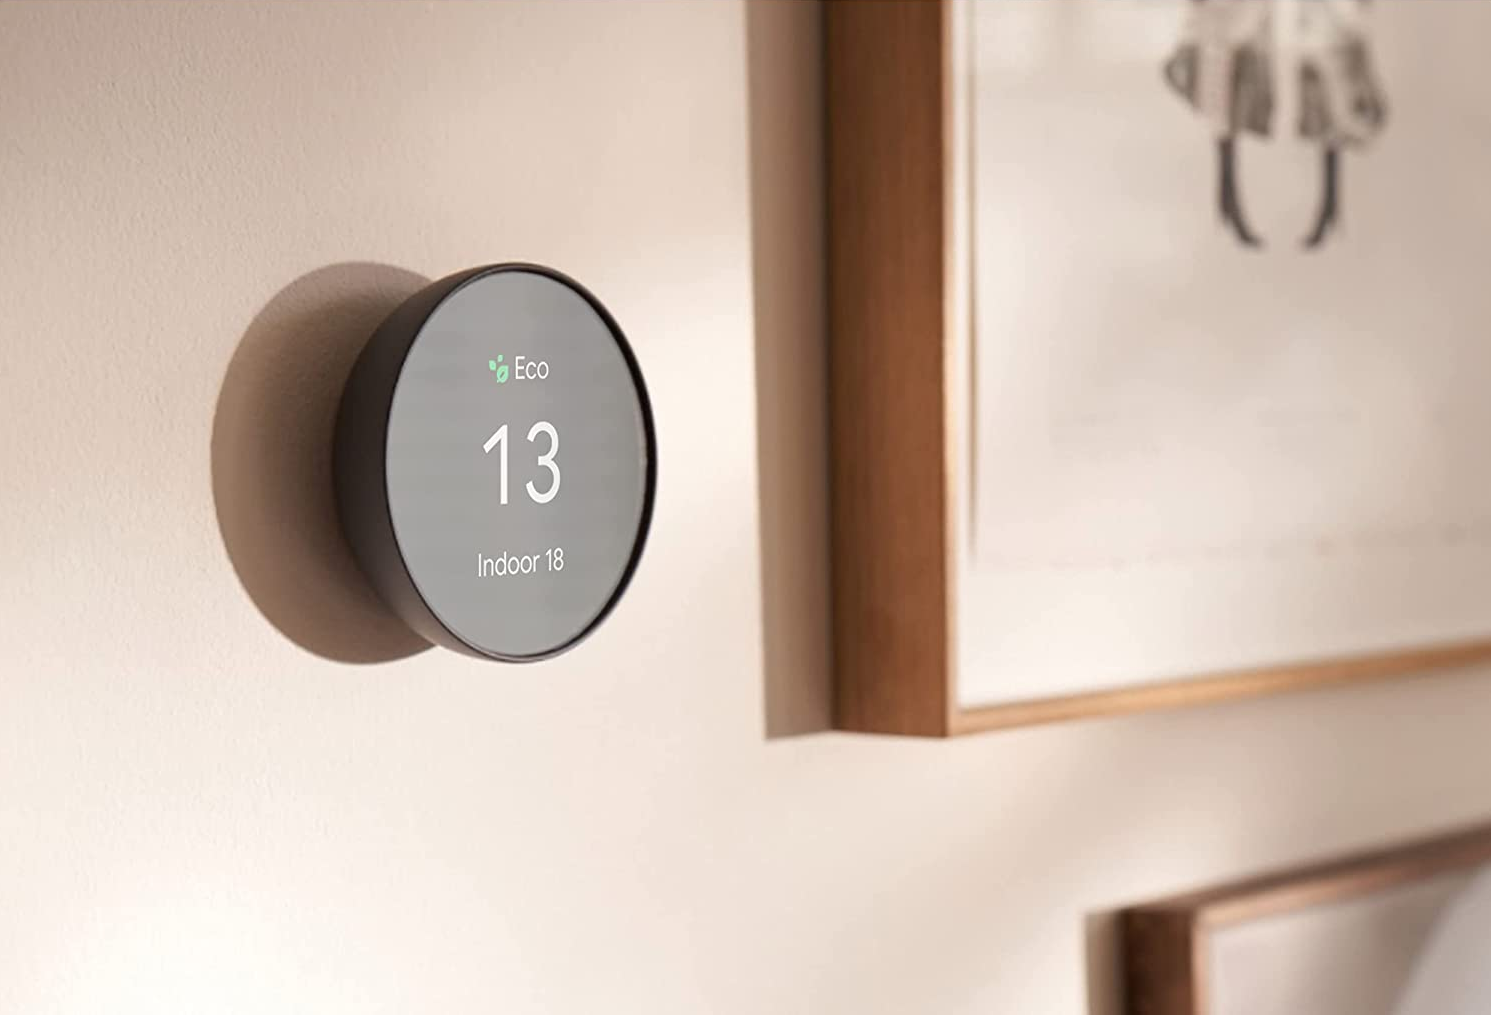 Google announces cleaner energy features for its thermostats with Nest